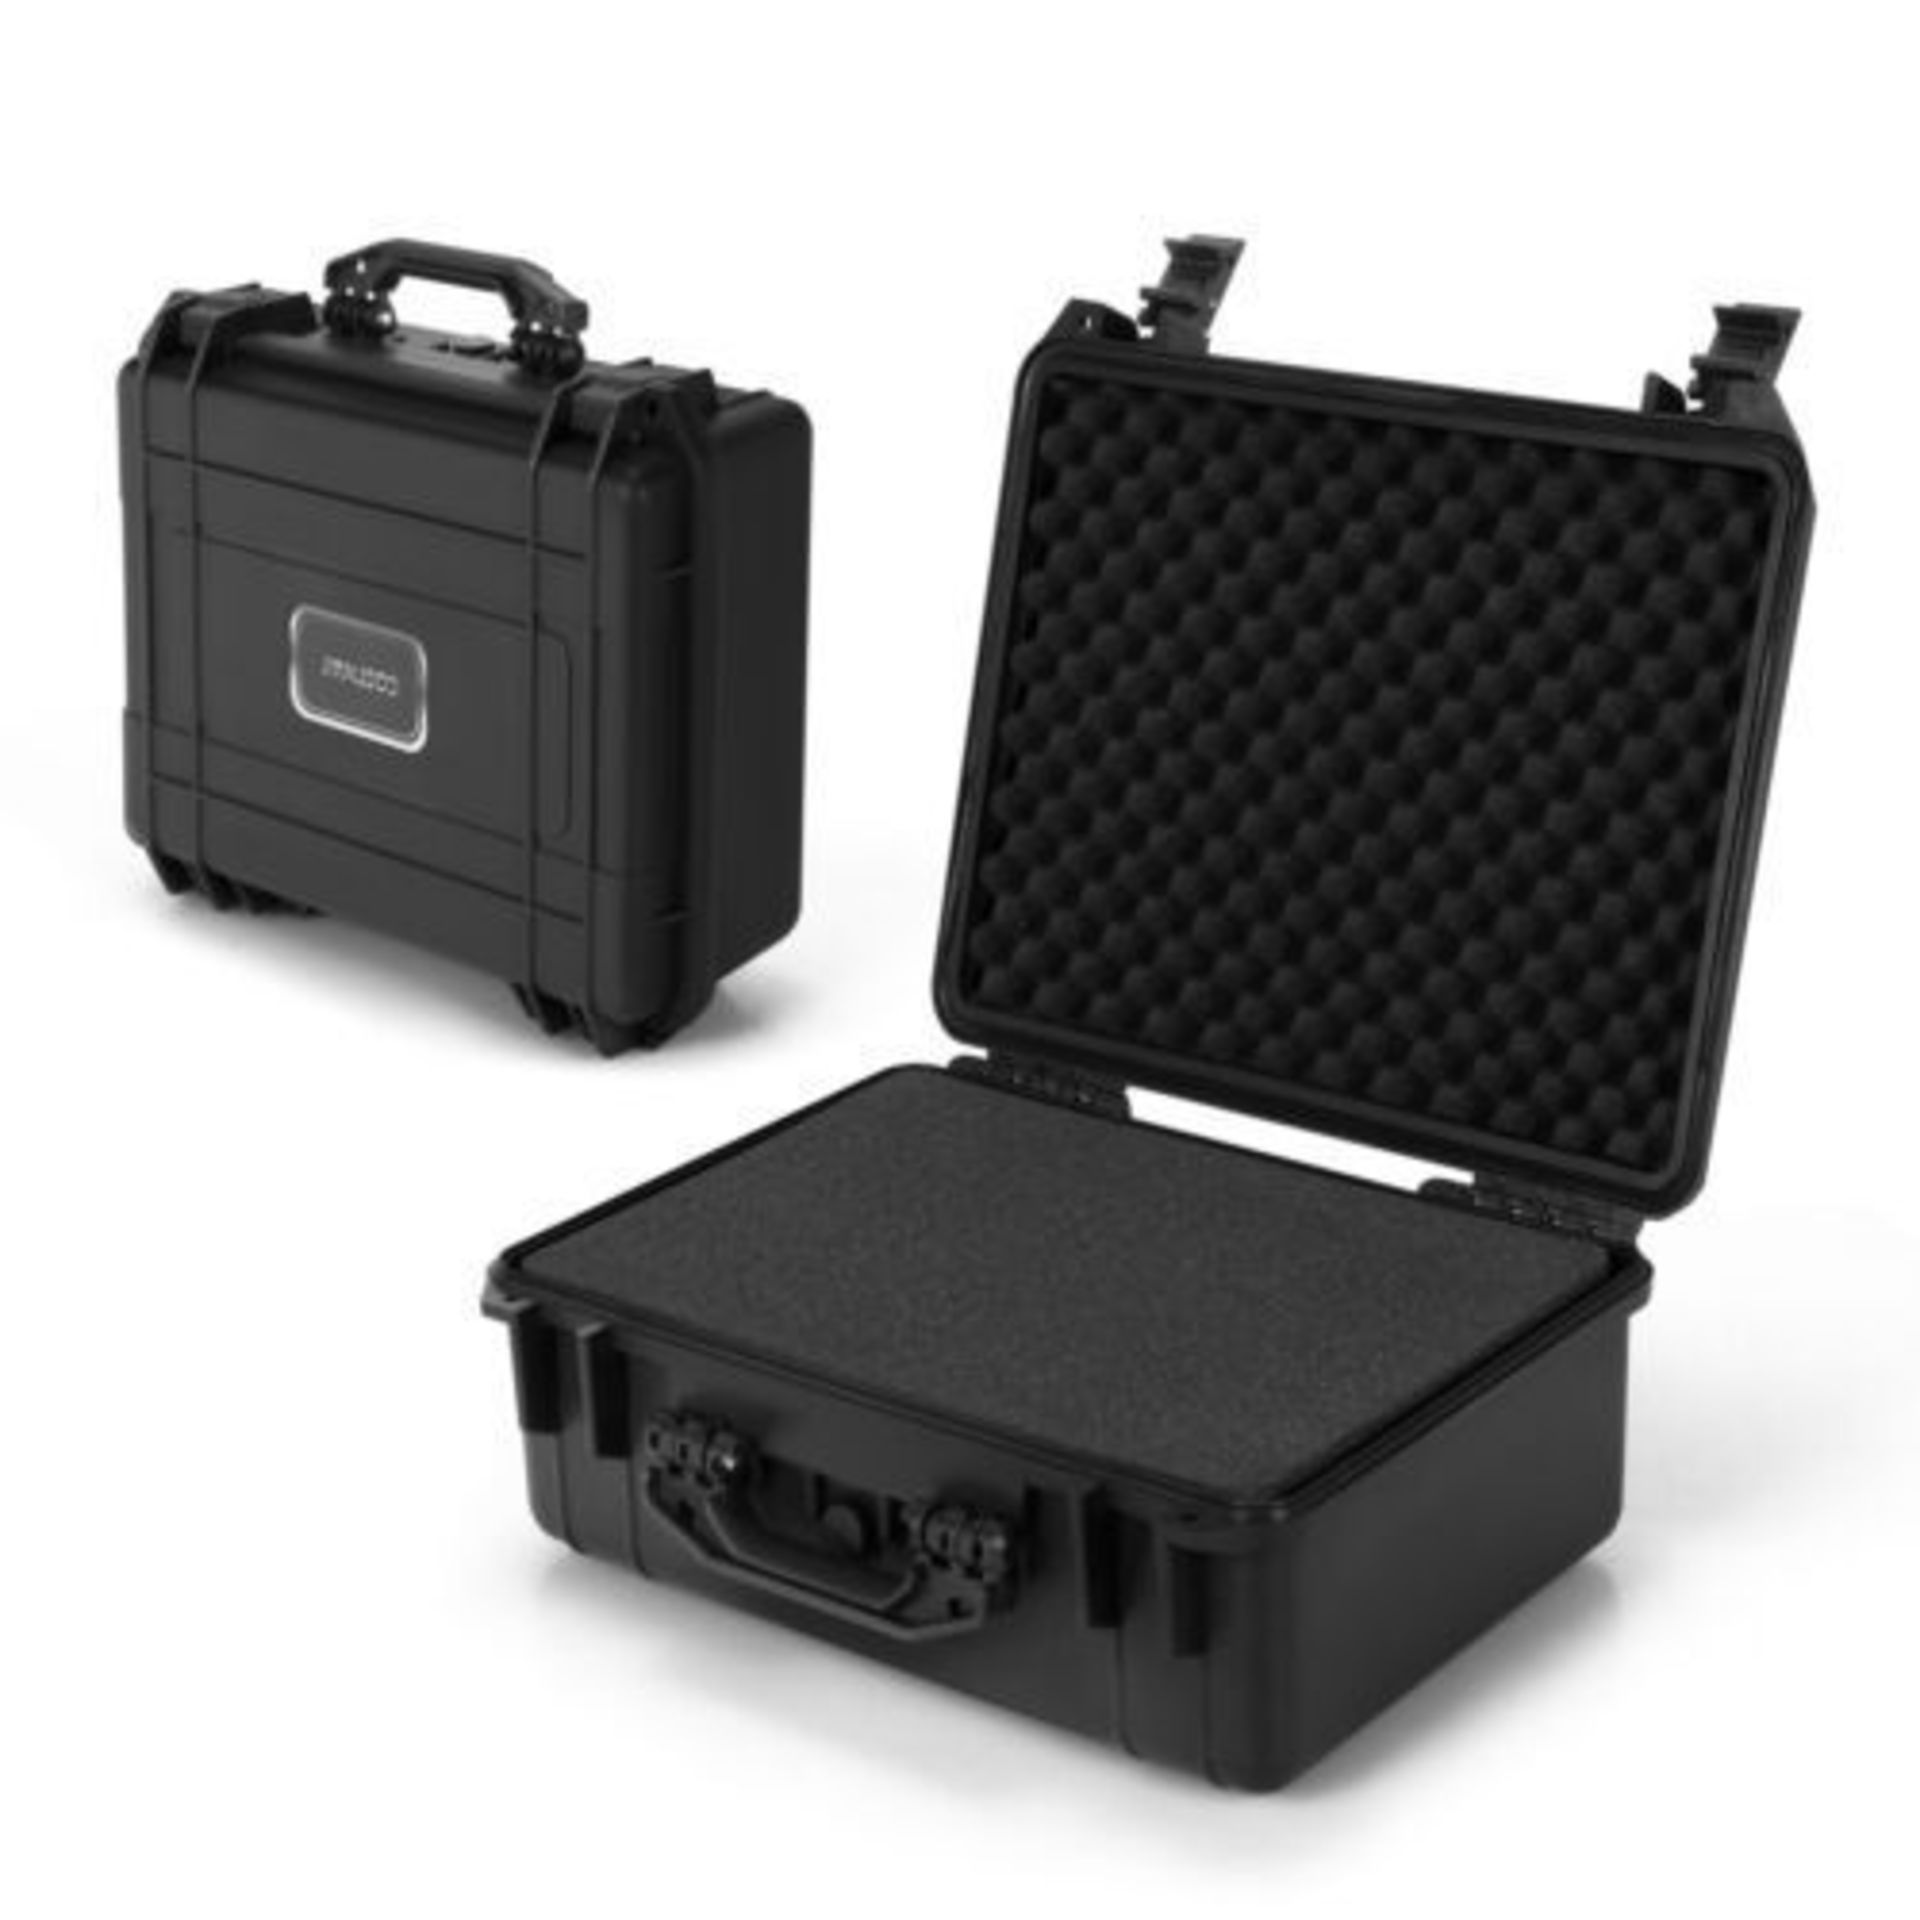 Portable Waterproof Hard Case with Customizable Fit Foam. - ER53. Made of premium PP material, the